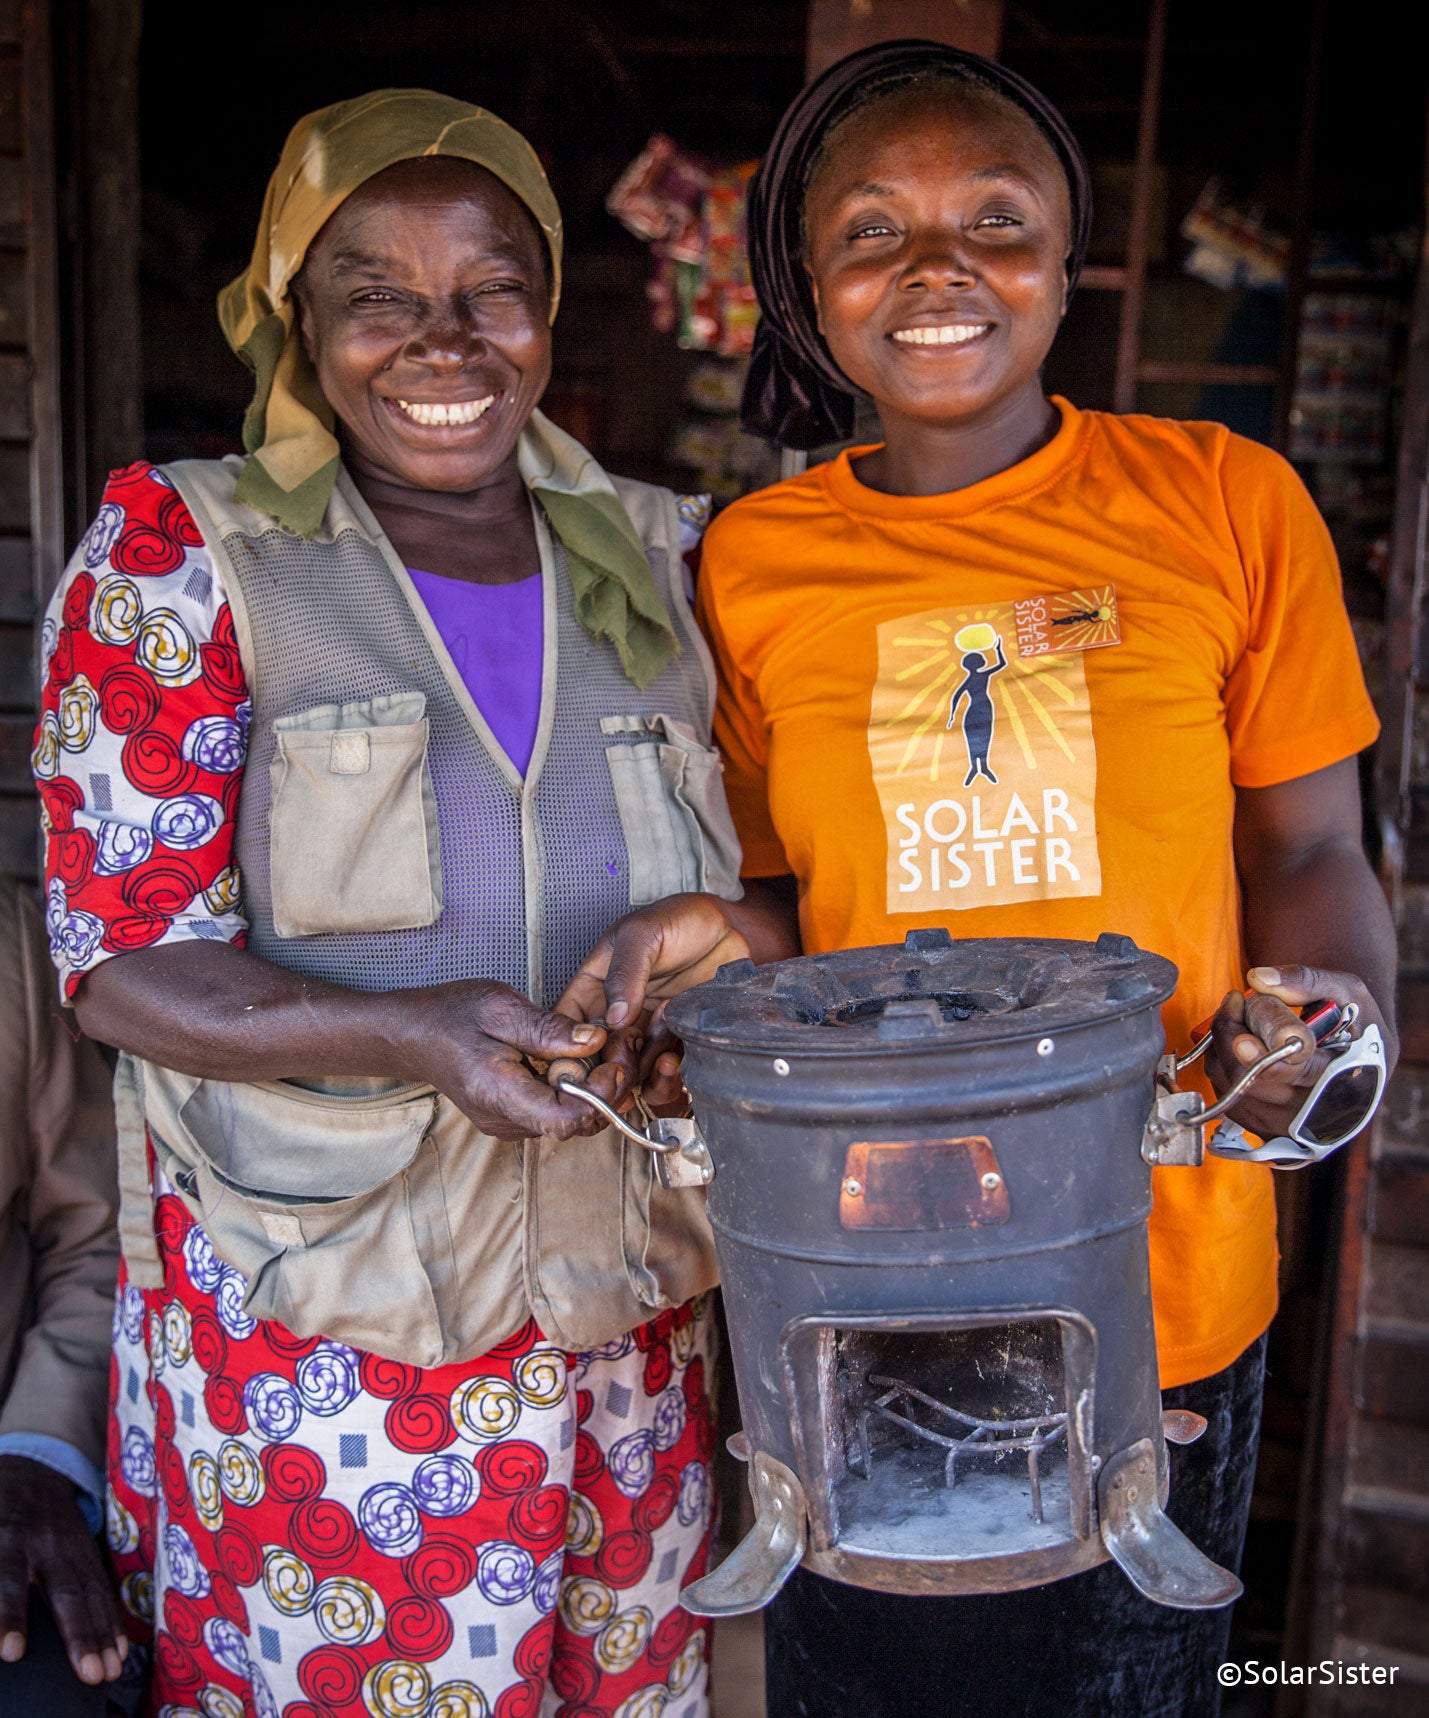 Two women stand, smiling at the camera, holding a fire stove. The woman on the right wears an orange Solar Sister t-shirt.